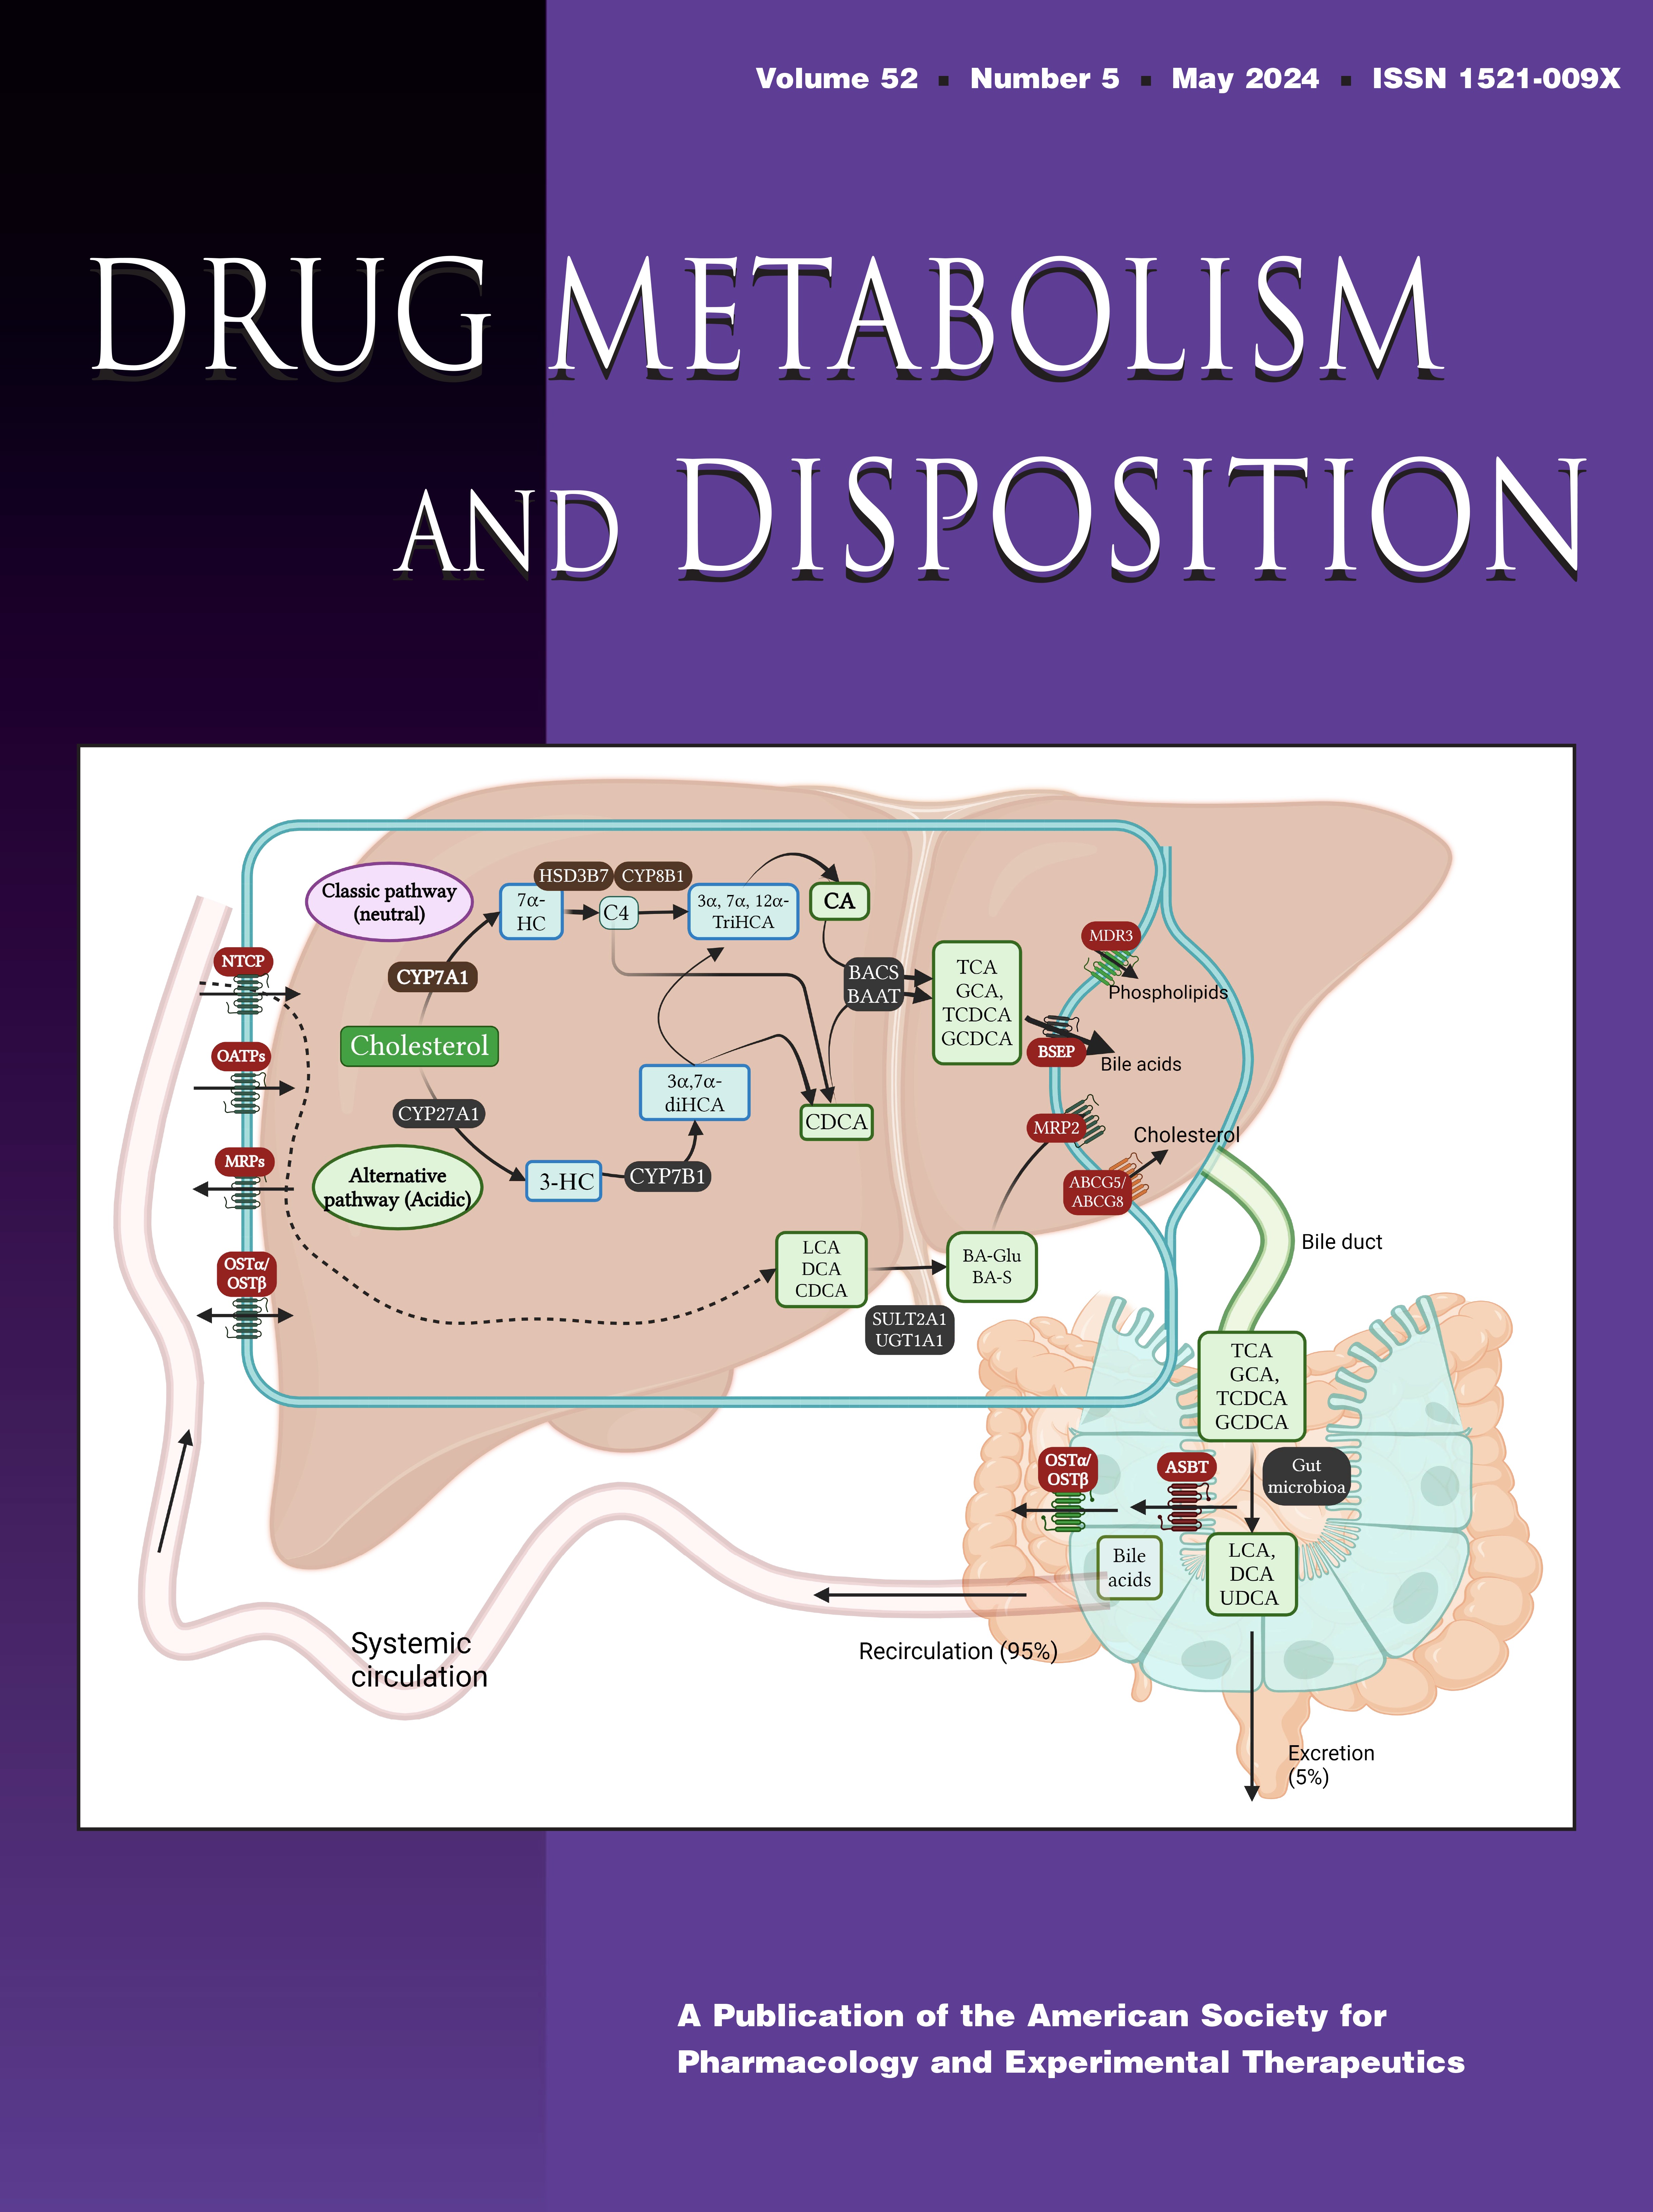 Identification and Biosynthesis of an N-Glucuronide Metabolite of Camonsertib [Articles]